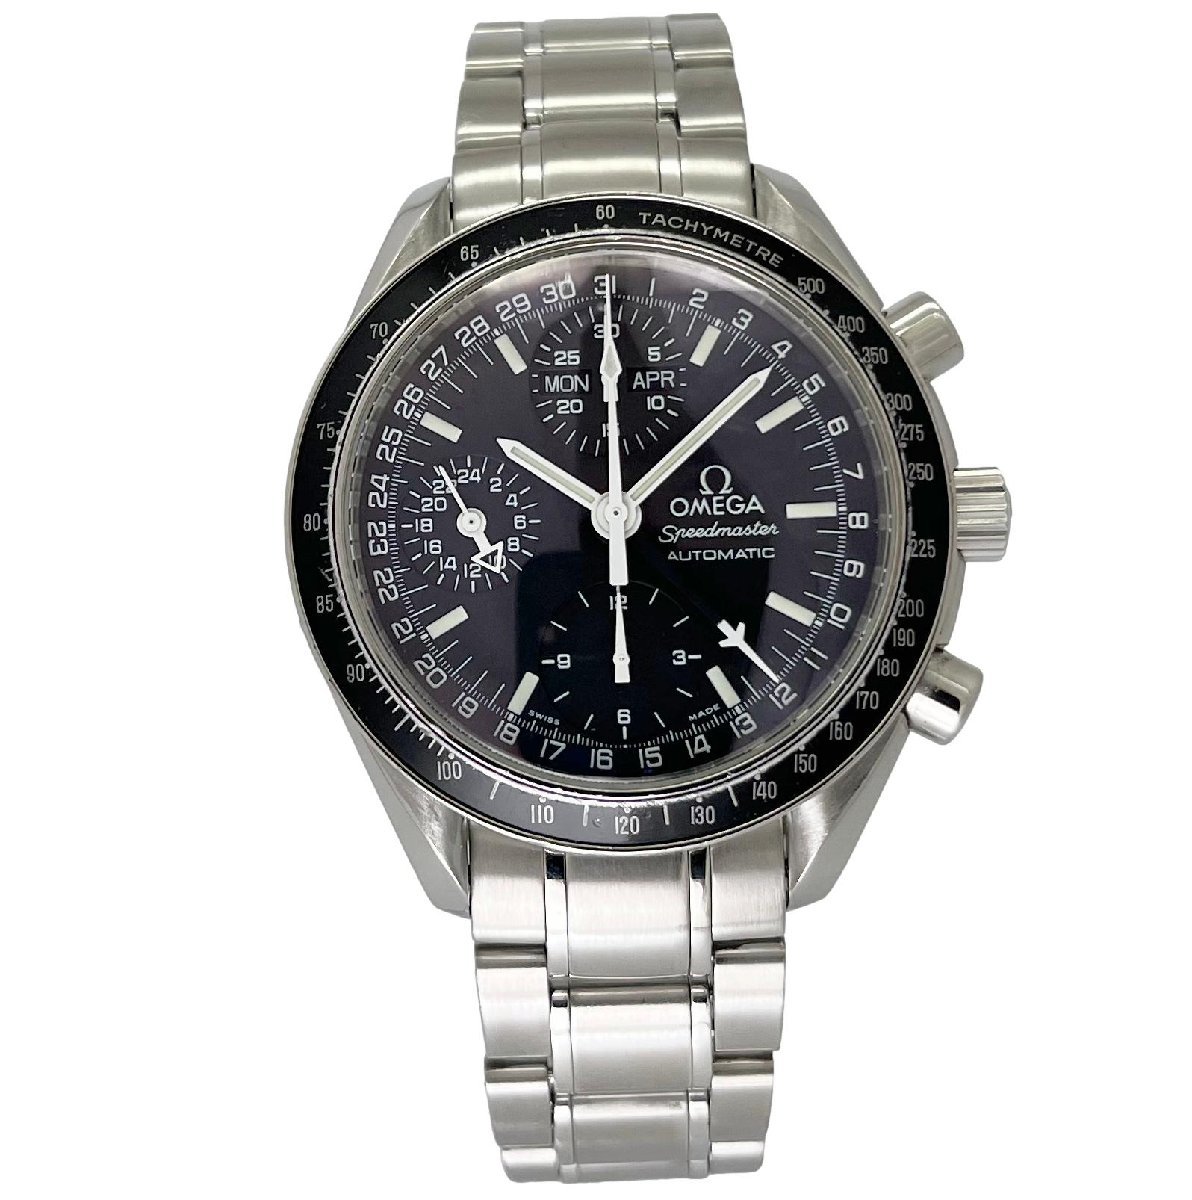 OMEGA Omega * Speedmaster * Mark 40 Cosmos 3520.50 used men's wristwatch chronograph self-winding watch [ exterior polishing up *Oh ending ]